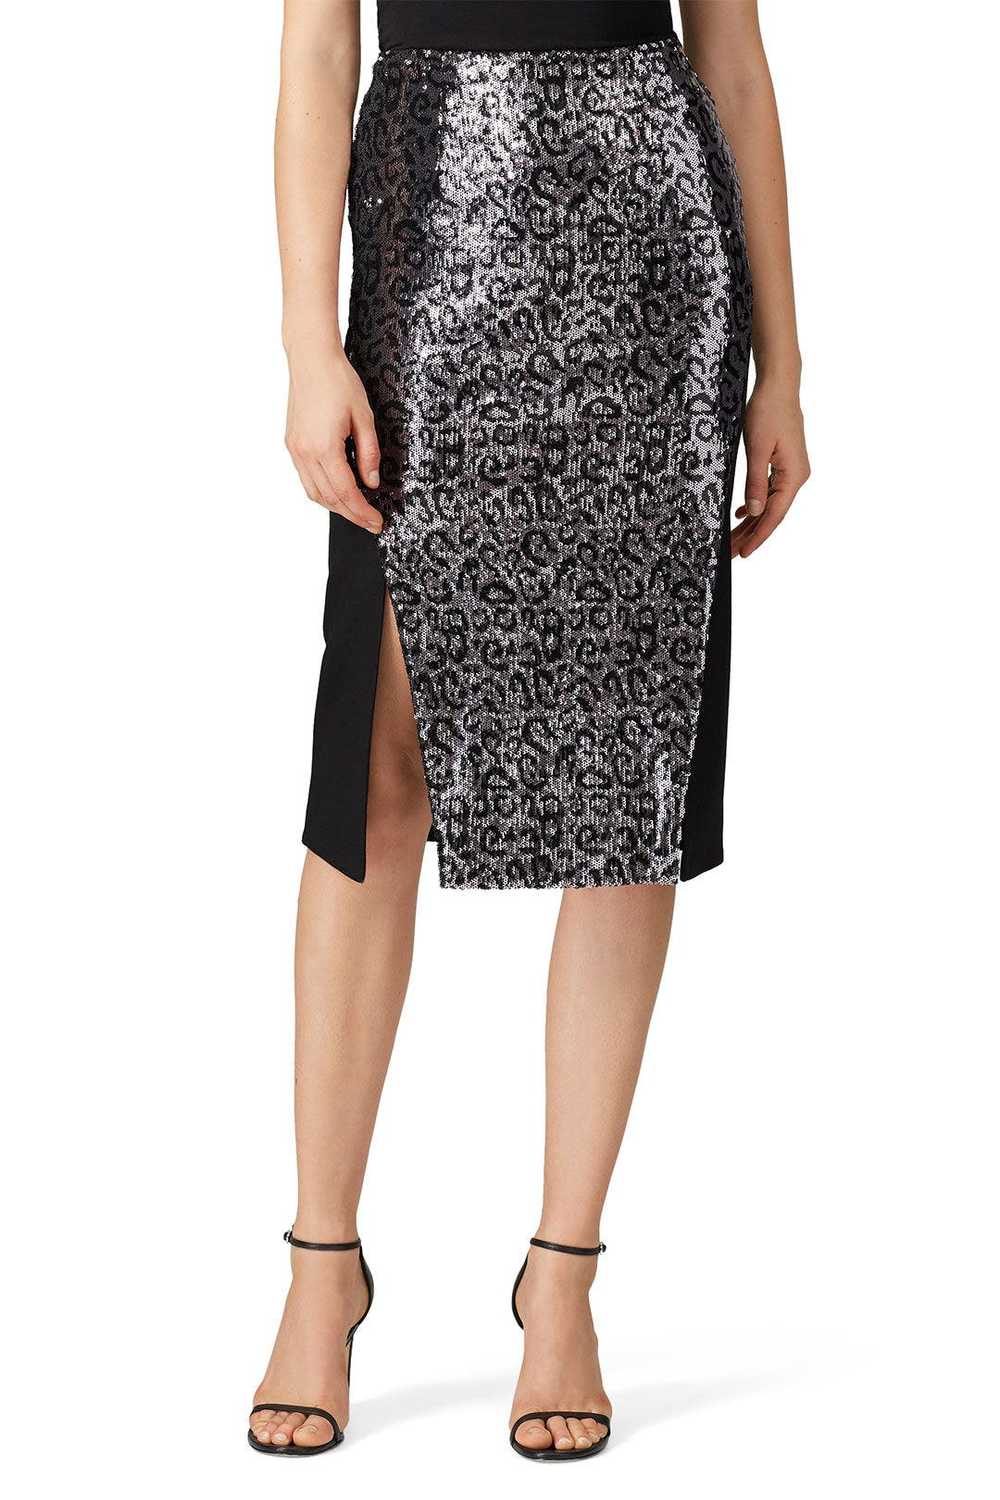 N12H First Row Sequin Skirt - image 2